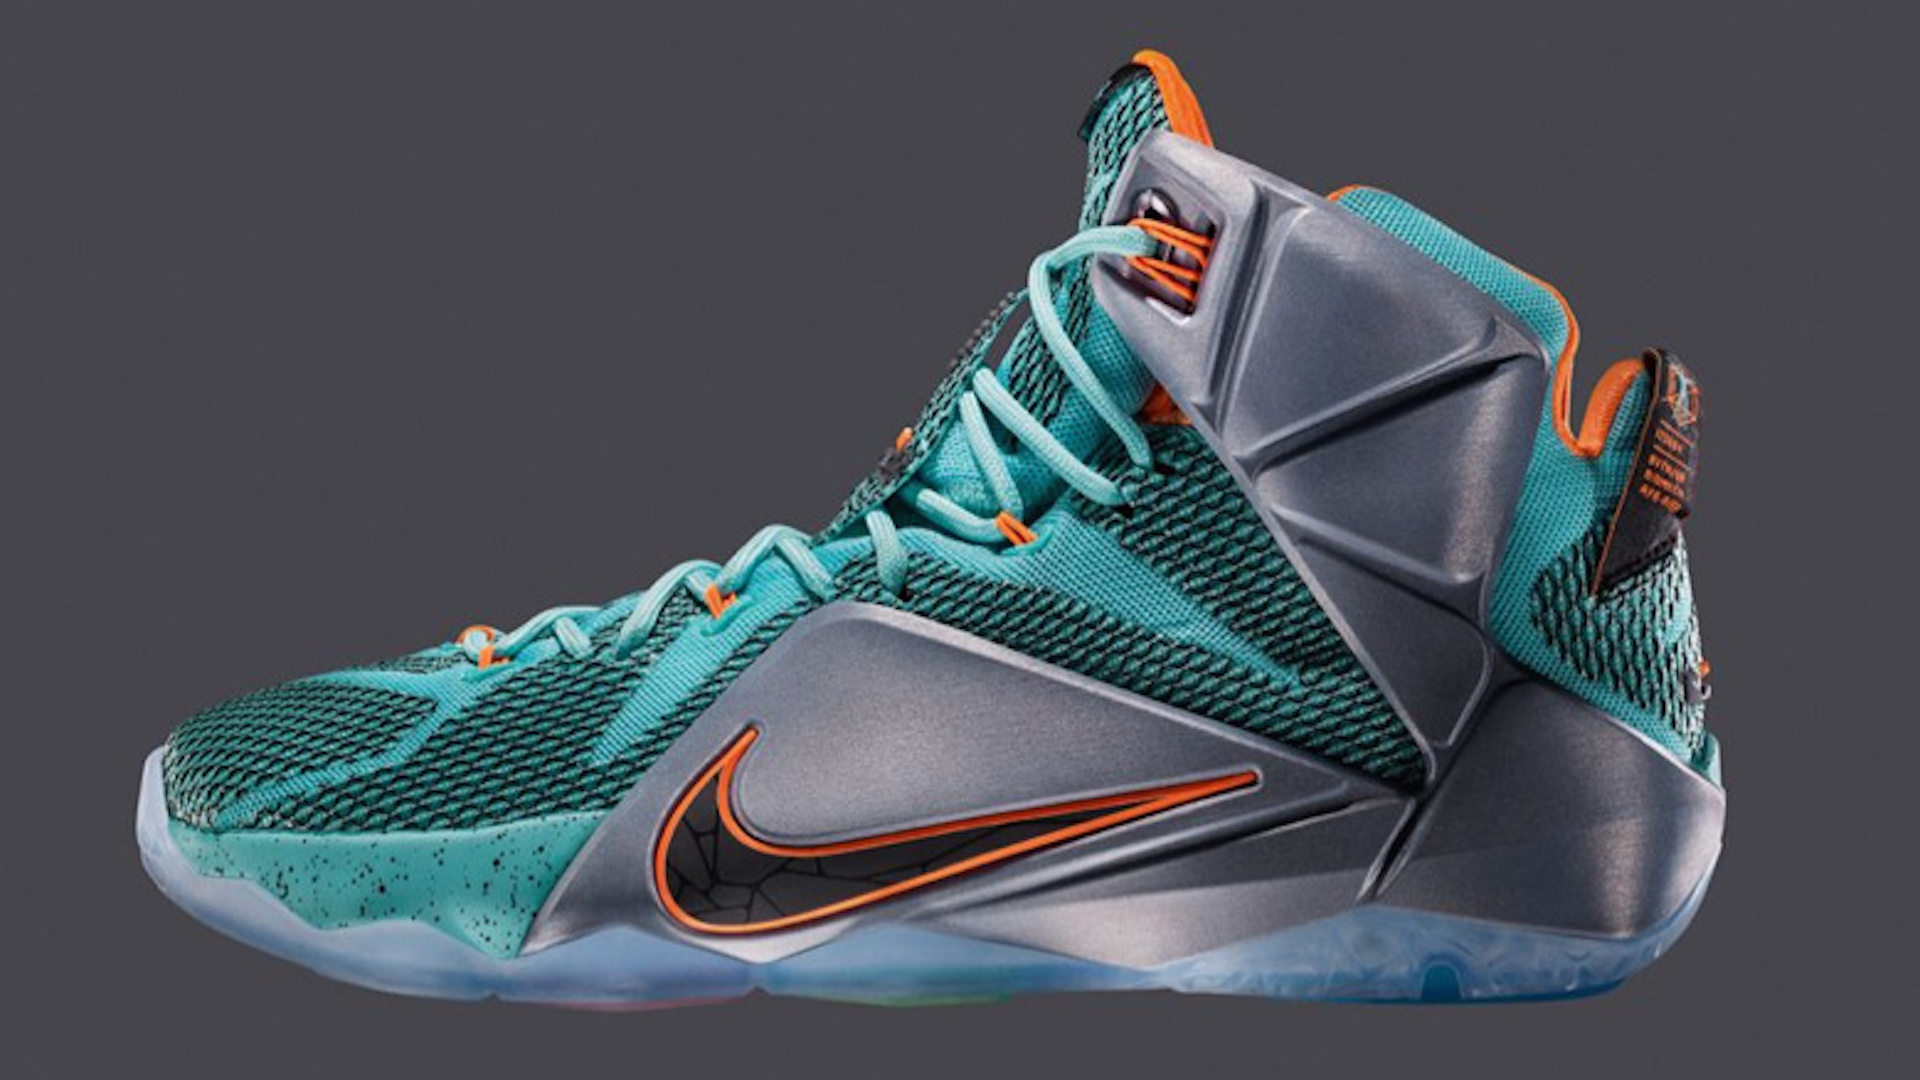  Nike  releases newest LeBron  James signature shoe  in LeBron  